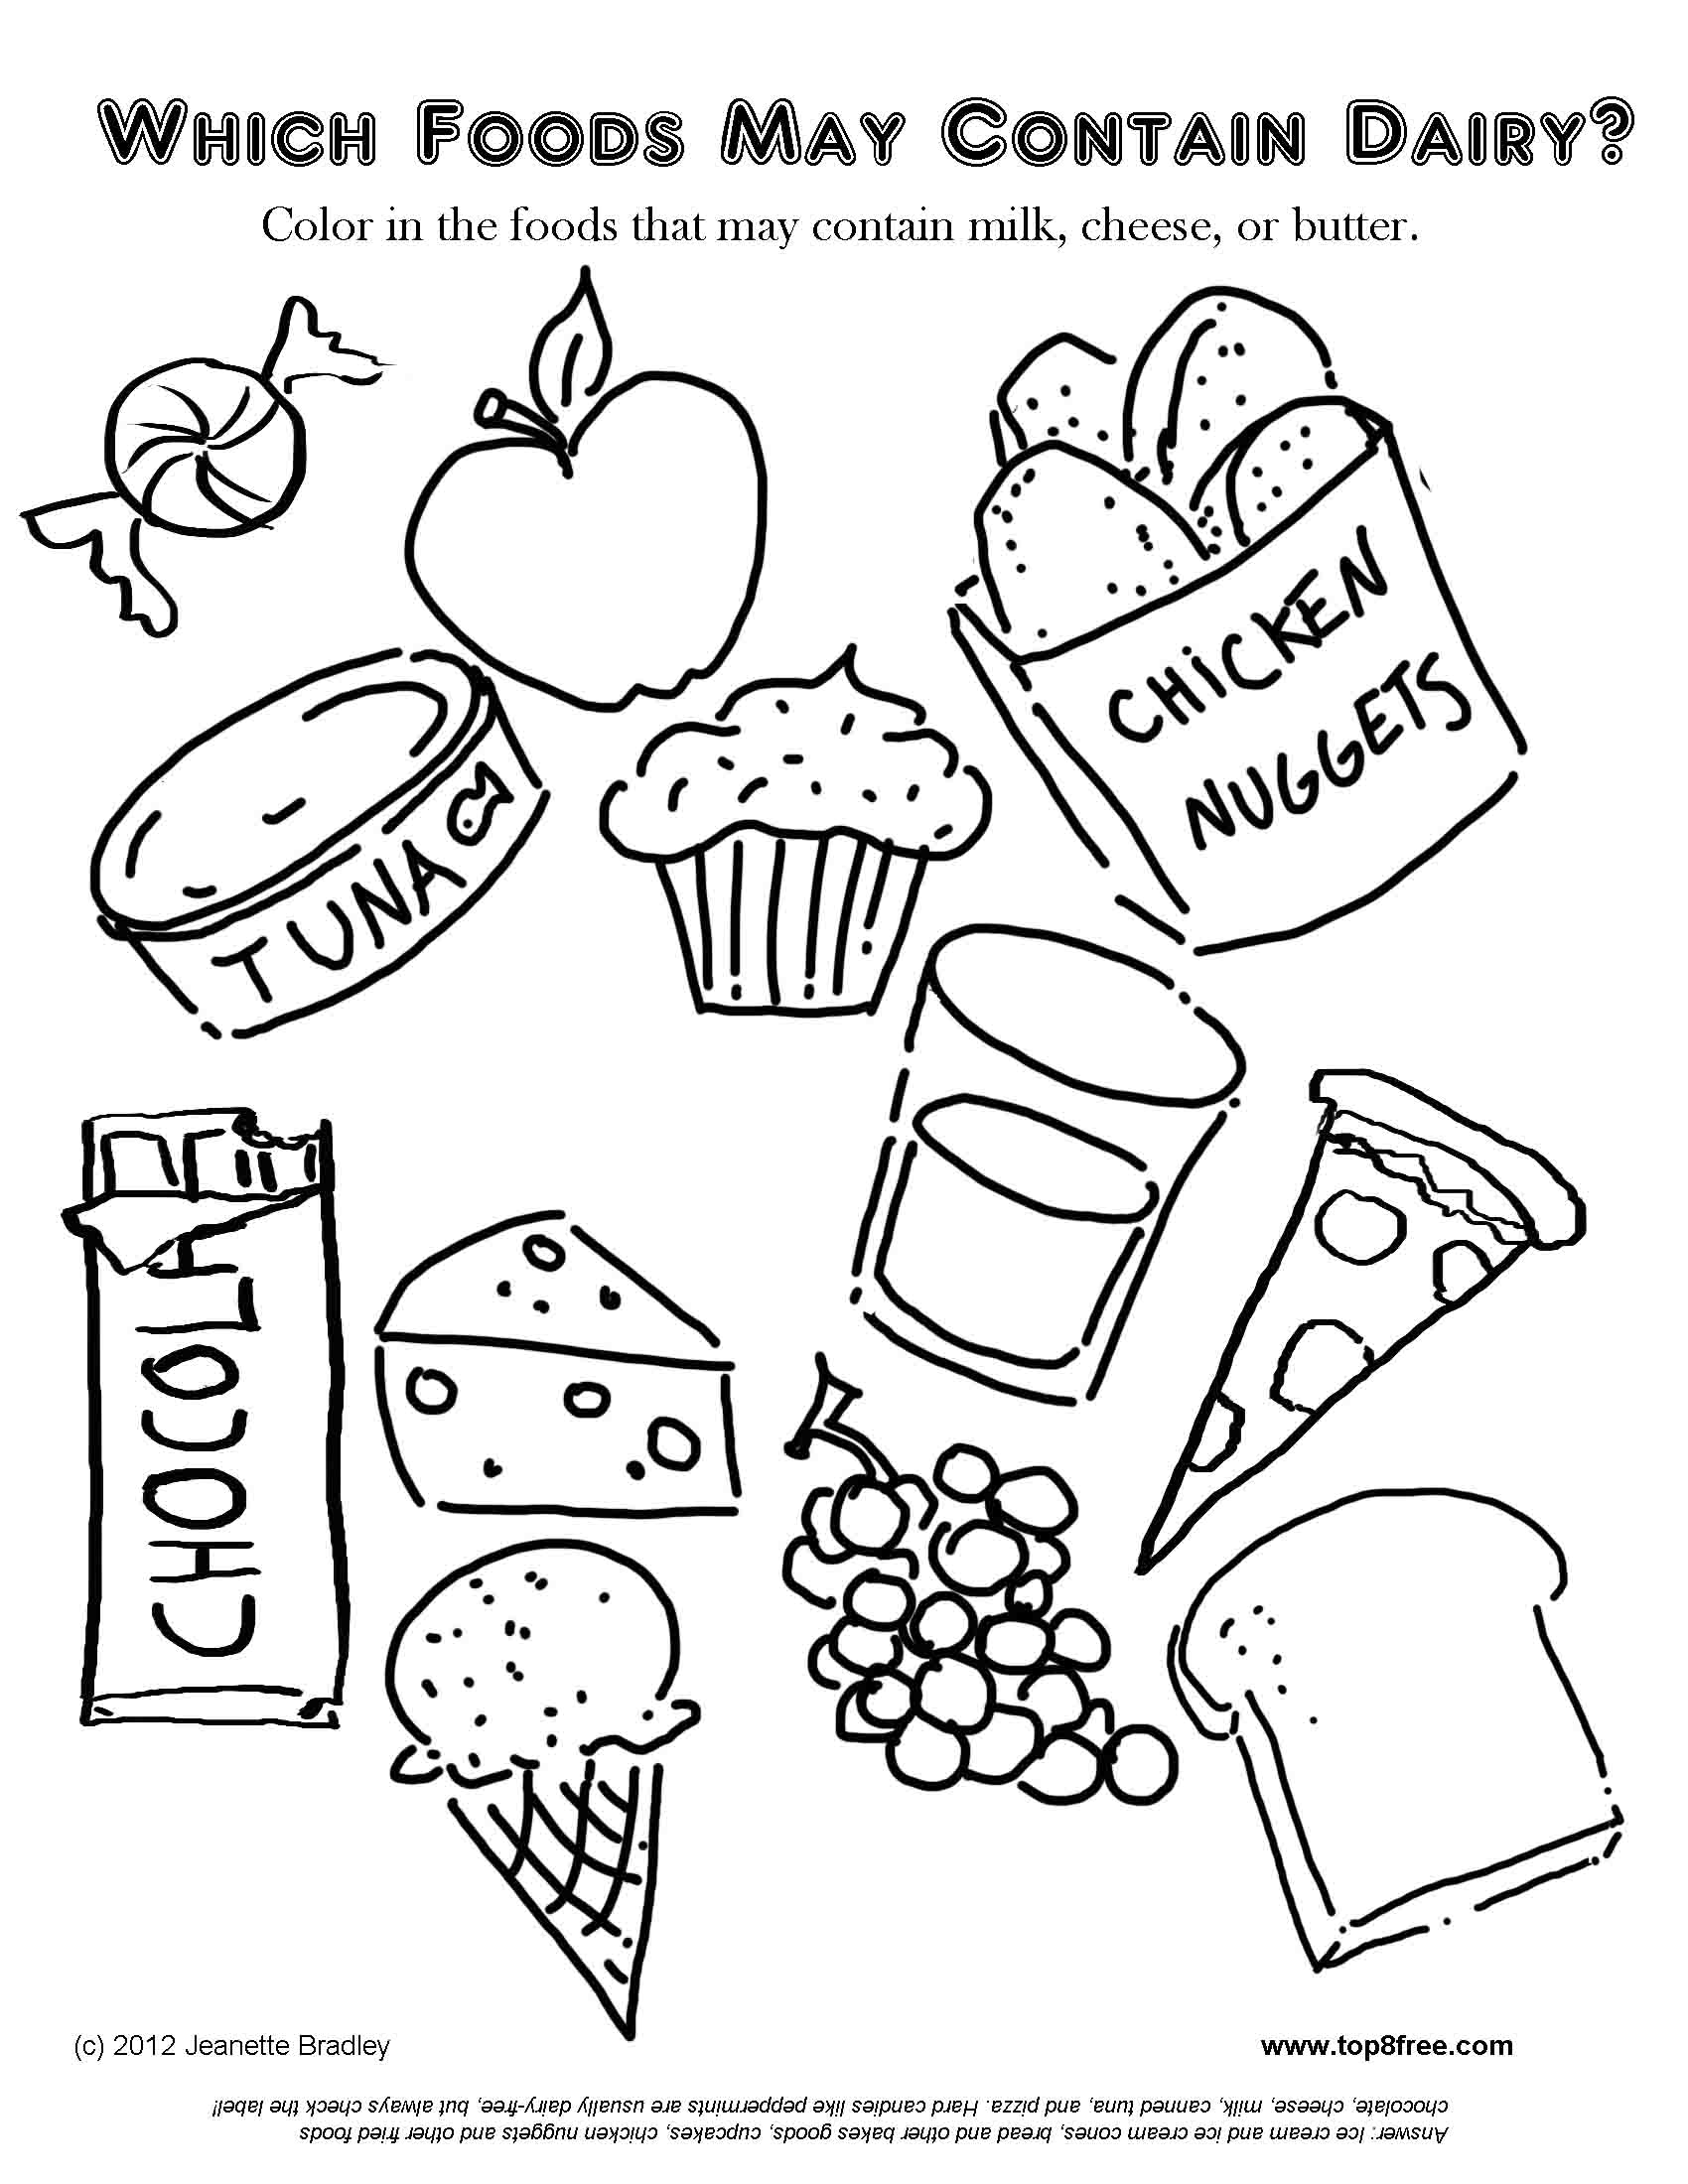 Free Dairy Coloring Page, Download Free Dairy Coloring Page png images ...